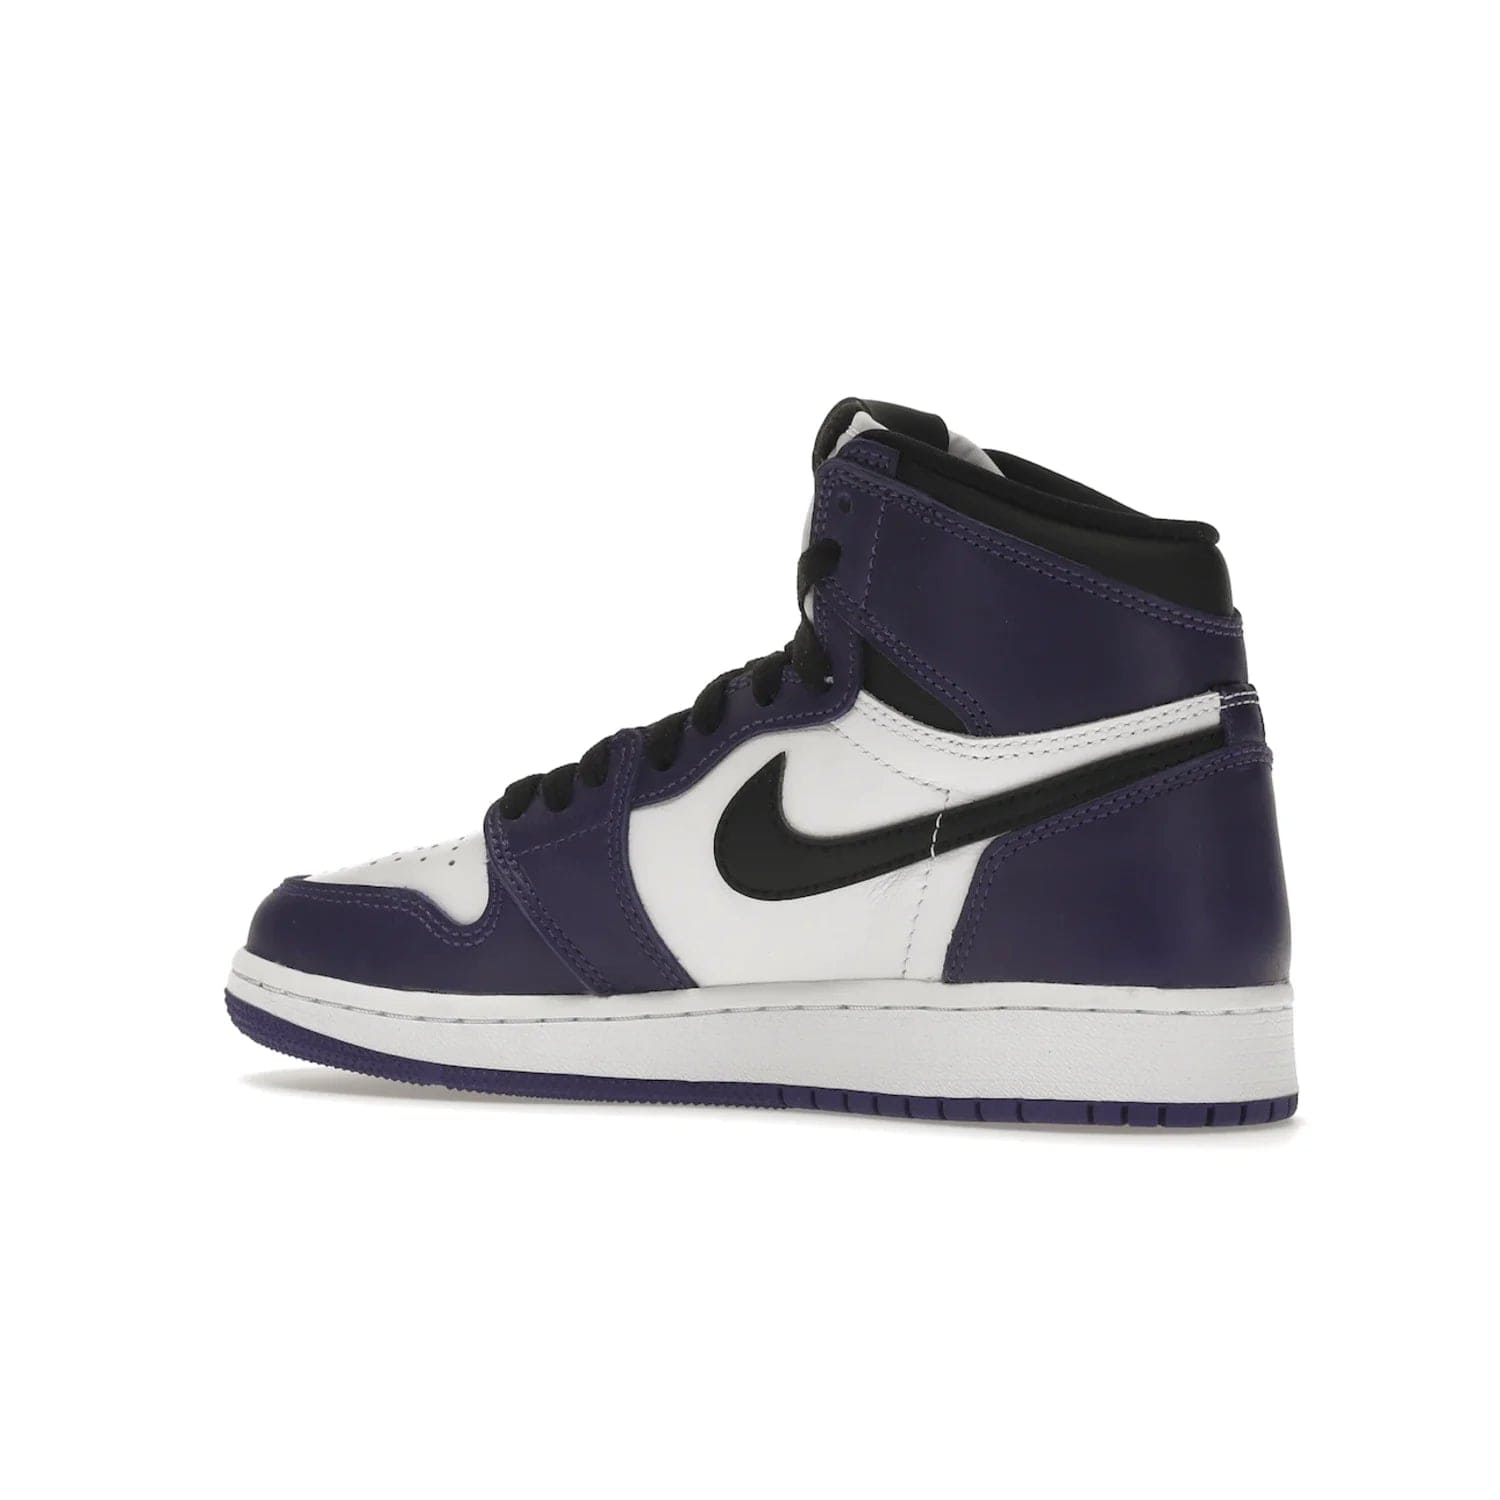 Jordan 1 Retro High Court Purple White (GS) - Image 22 - Only at www.BallersClubKickz.com - The Air Jordan 1 Retro High Court Purple is here and young sneaker heads can show off classic style. Features a white tumbled leather upper, black swoosh, purple overlays, black collar with purple overlay, white tongue, black patch with purple Nike Air logo and swoosh, white midsole, and purple rubber outsole with circular pattern.